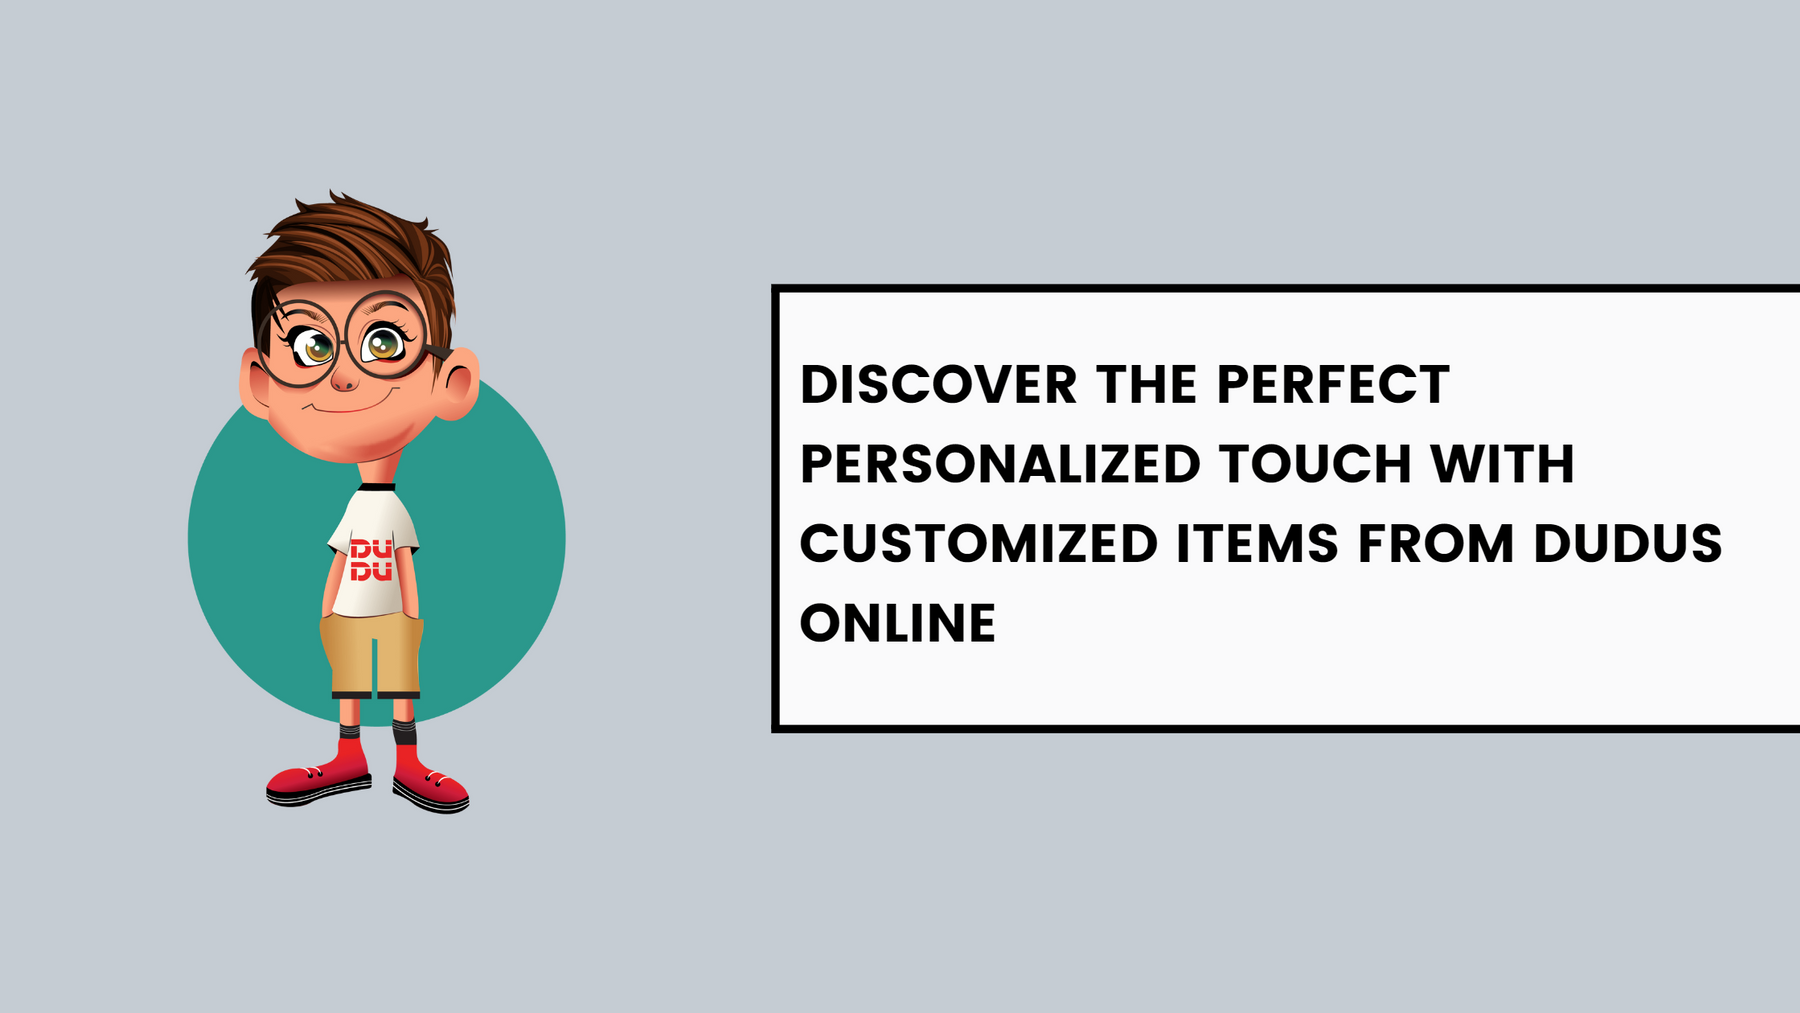 Discover the Perfect Personalized Touch with Customized Items from Dudus Online